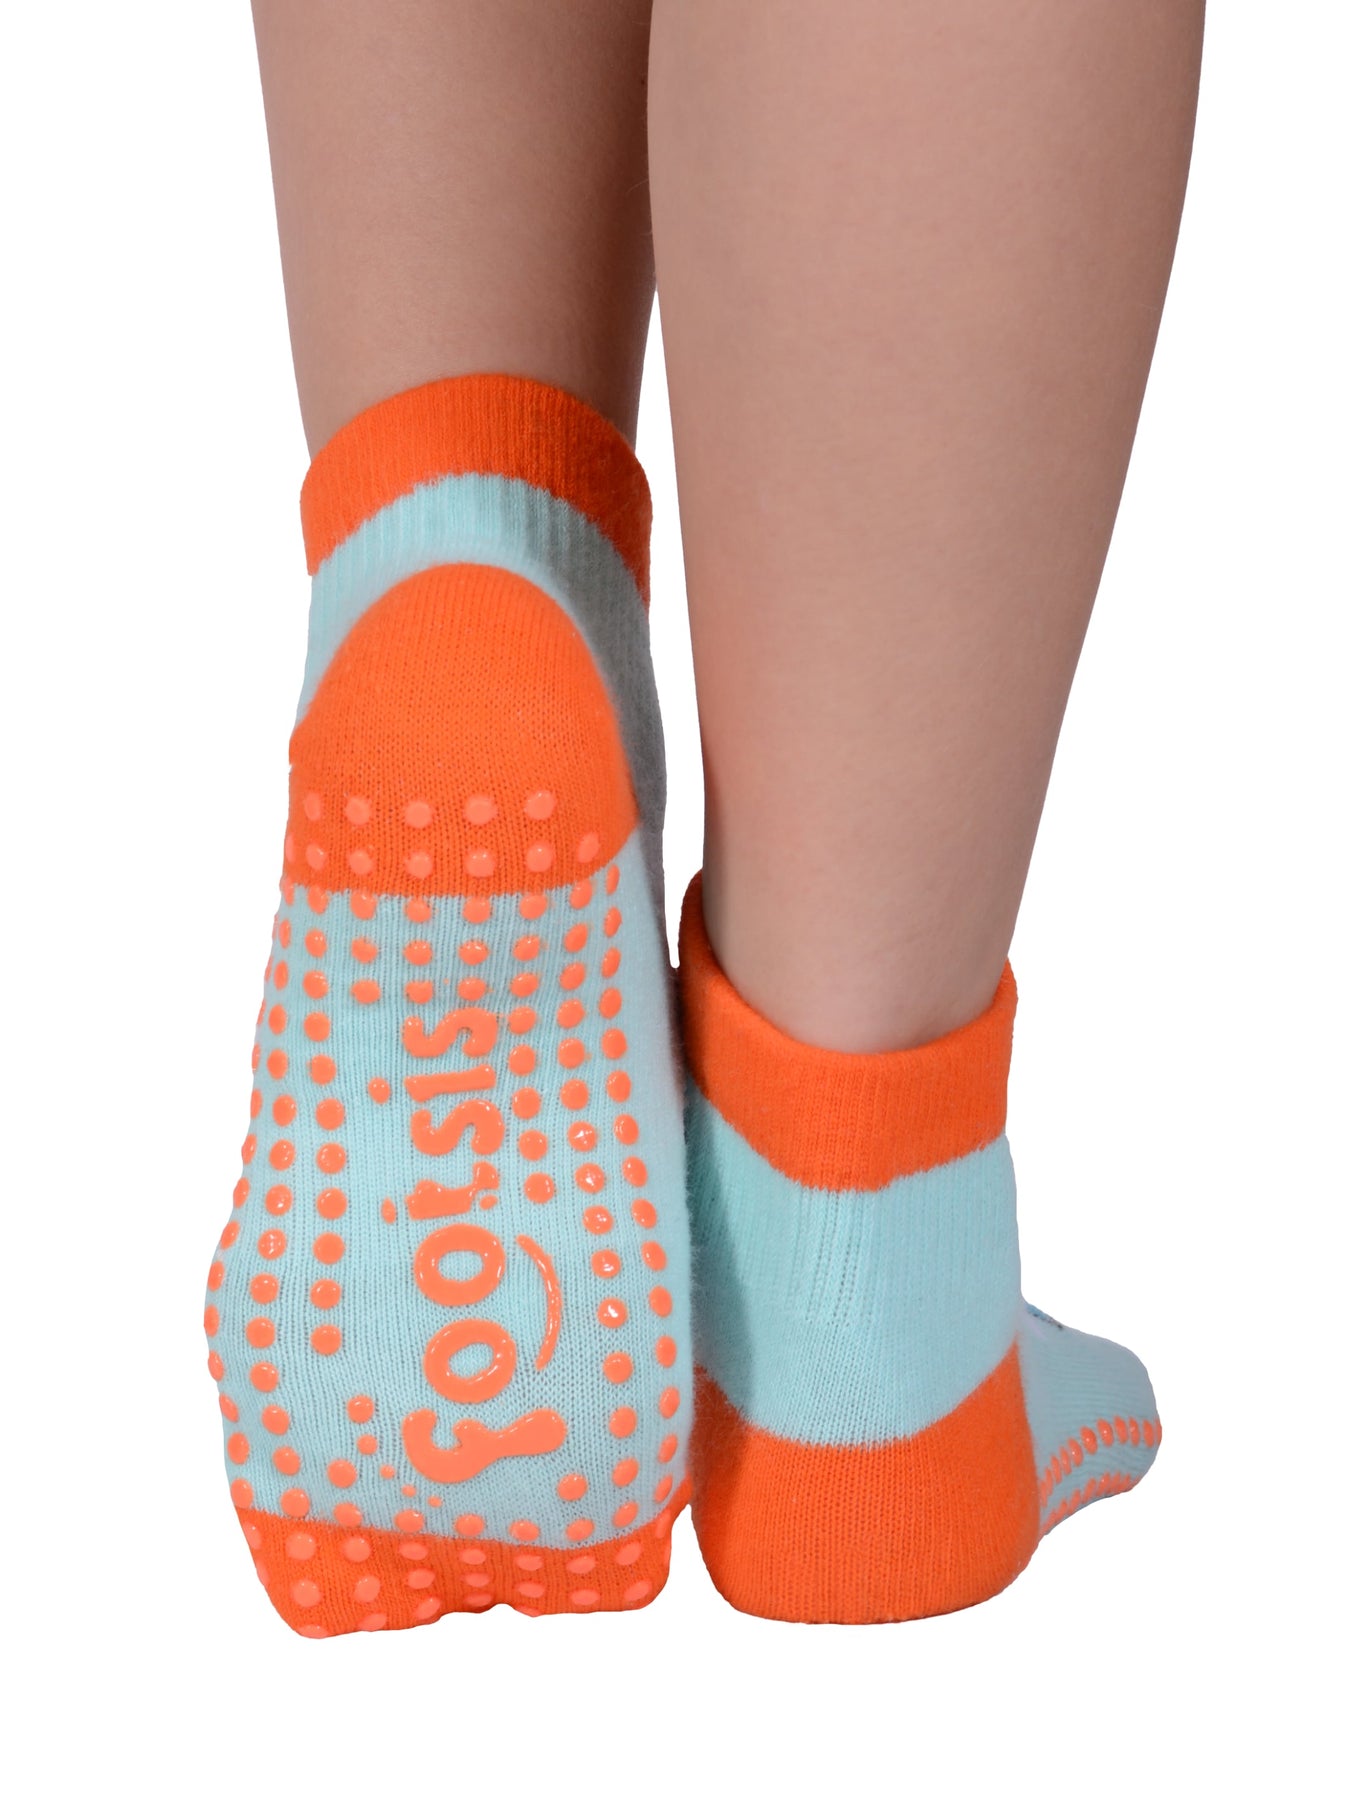 FOOTSIS Non Slip Grip Socks for Yoga, Pilates, Barre, Home, Hospital ,Mommy  and Me classes Plane